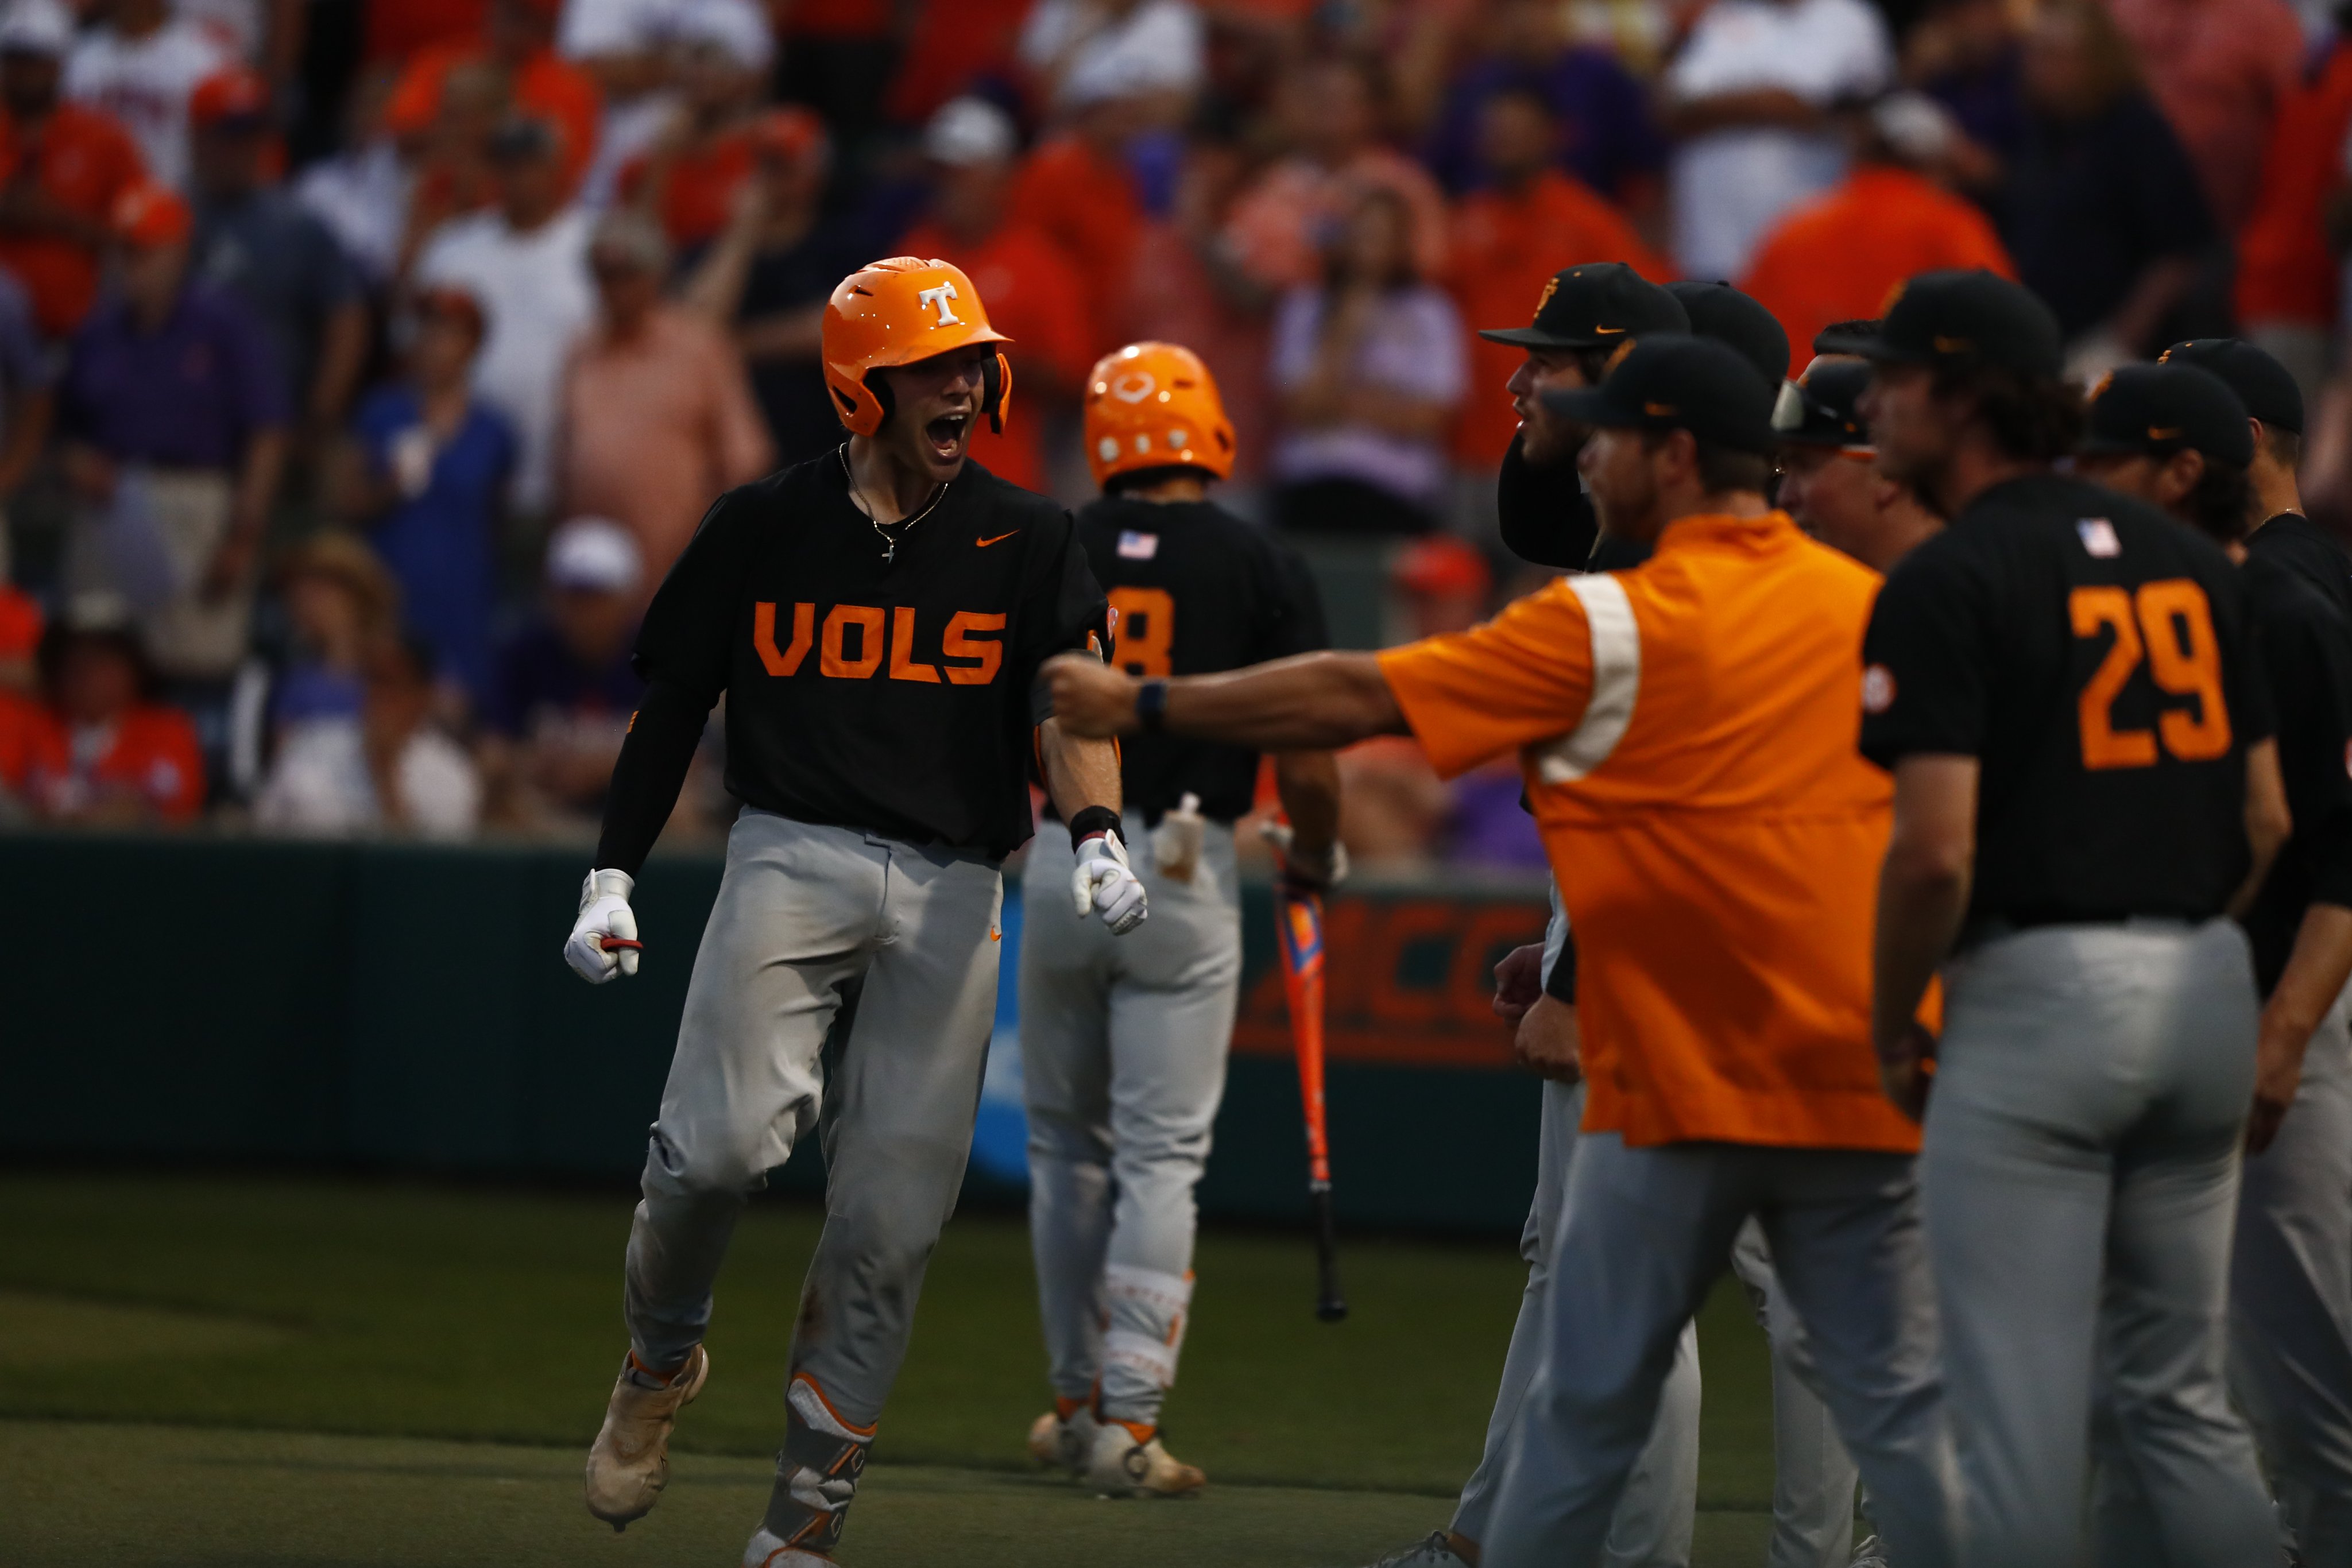 Tennessee Baseball on X: COME ON YOU VOLUNTEERS!!!!! TENNESSEE